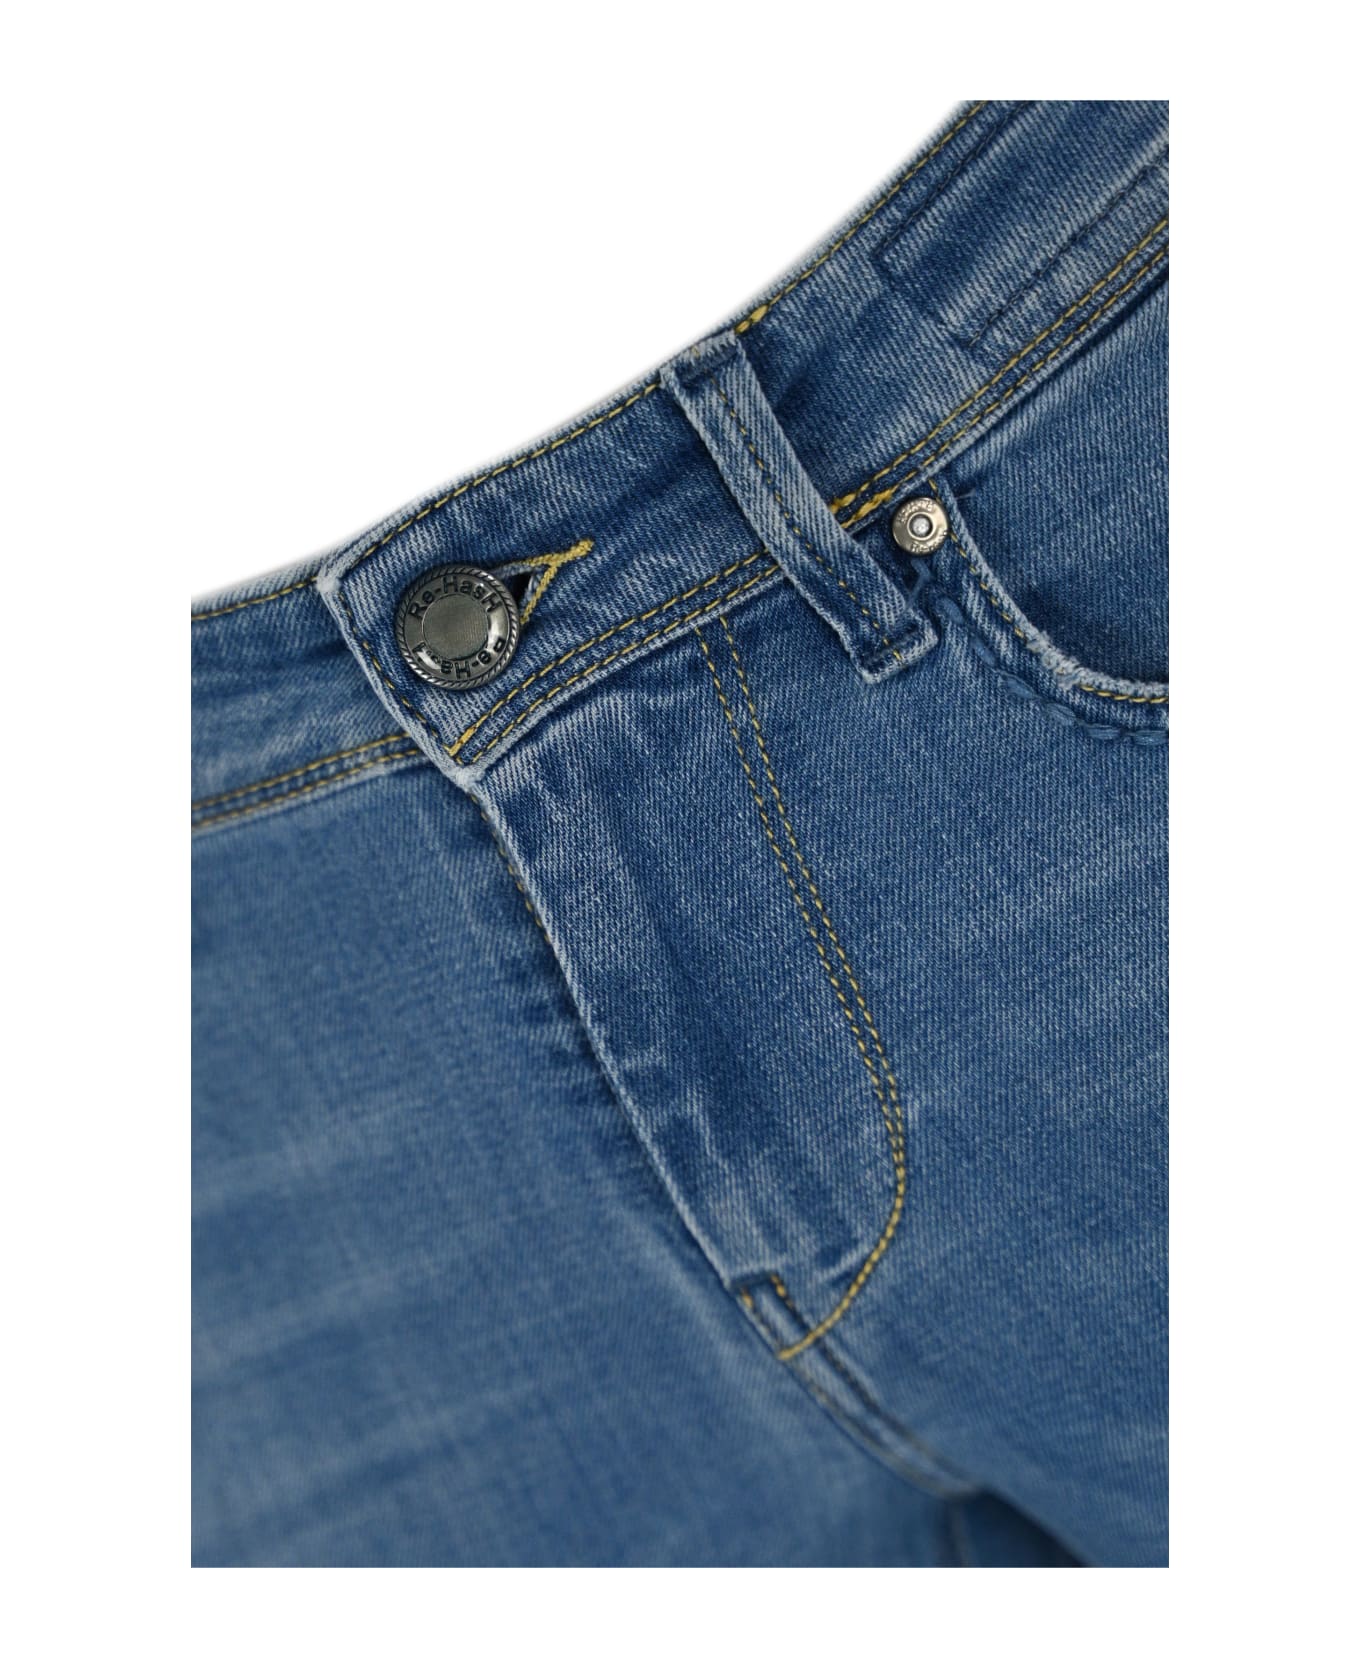 Re-HasH Blue Rubens Jeans - Blue ボトムス